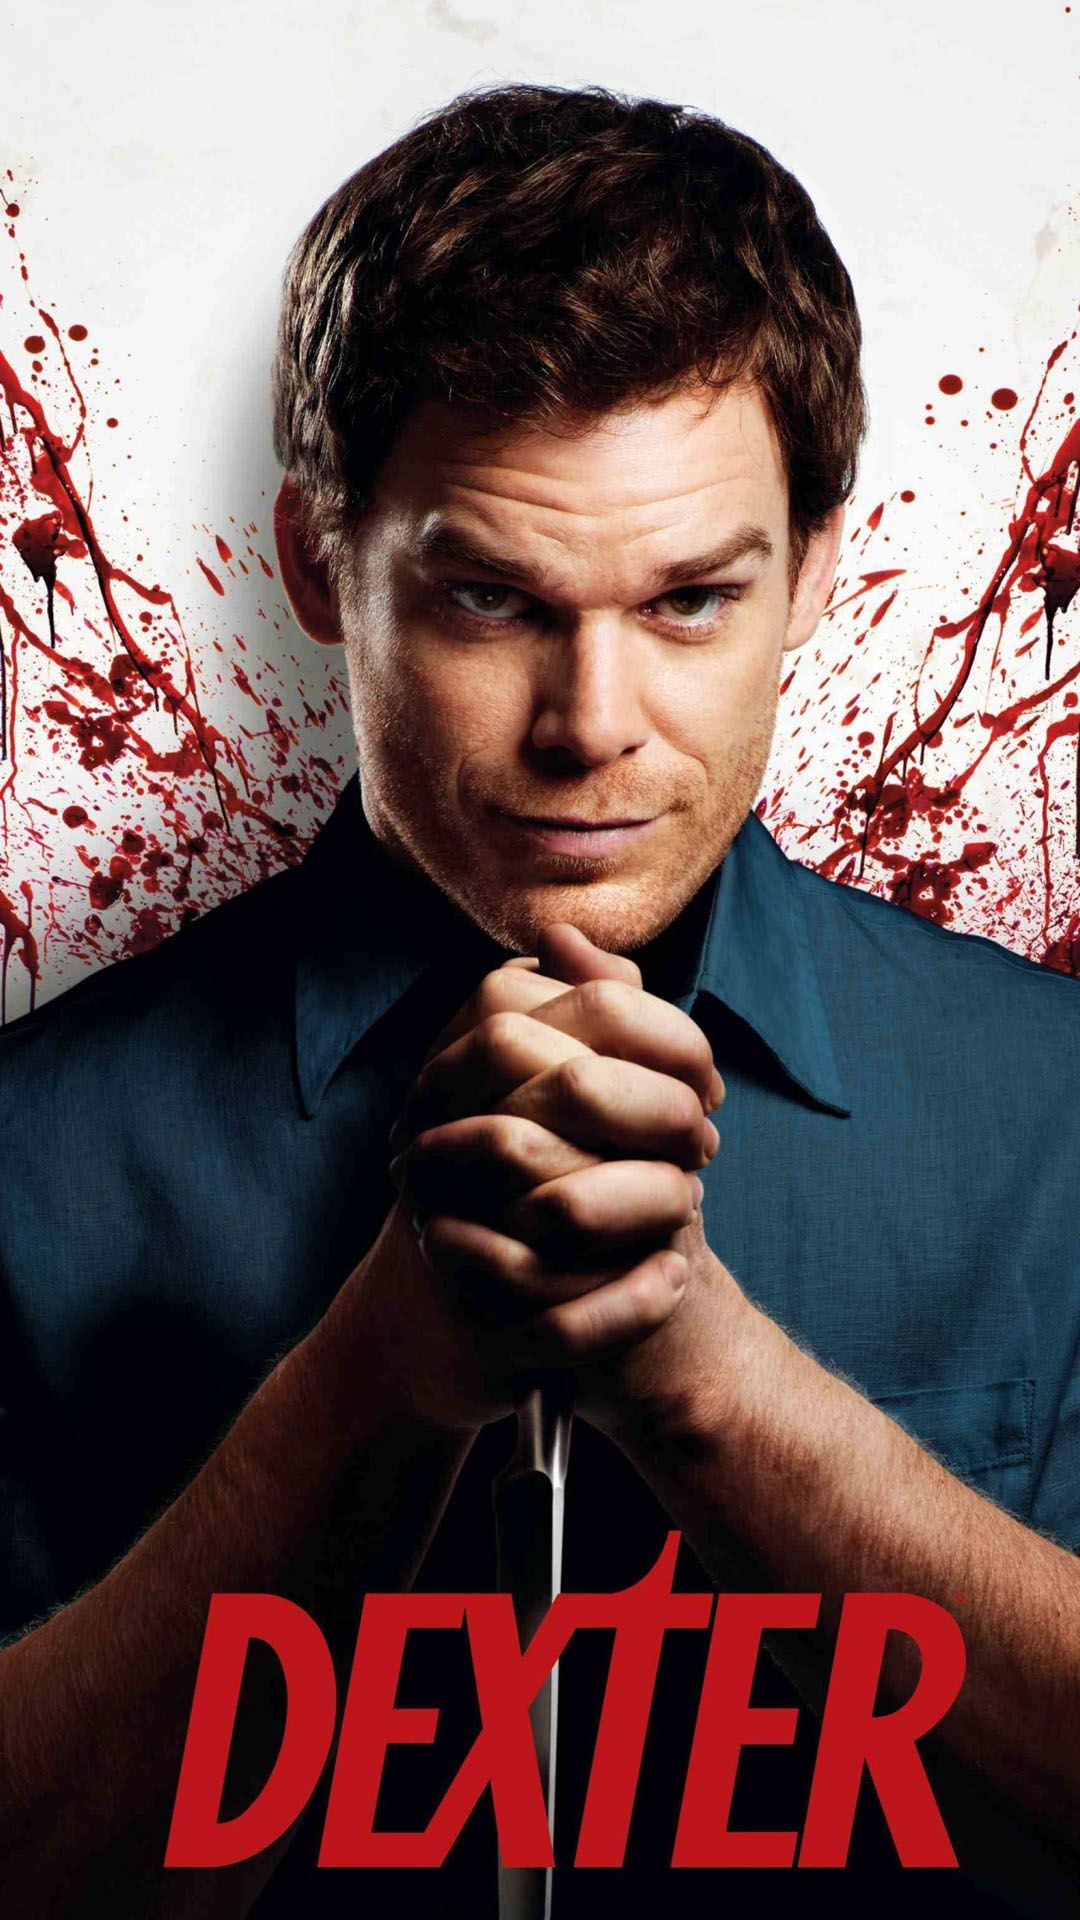 Michael C. Hall: Starred as Tom Delaney, British widower and doctor, in Netflix's Safe. 1080x1920 Full HD Wallpaper.